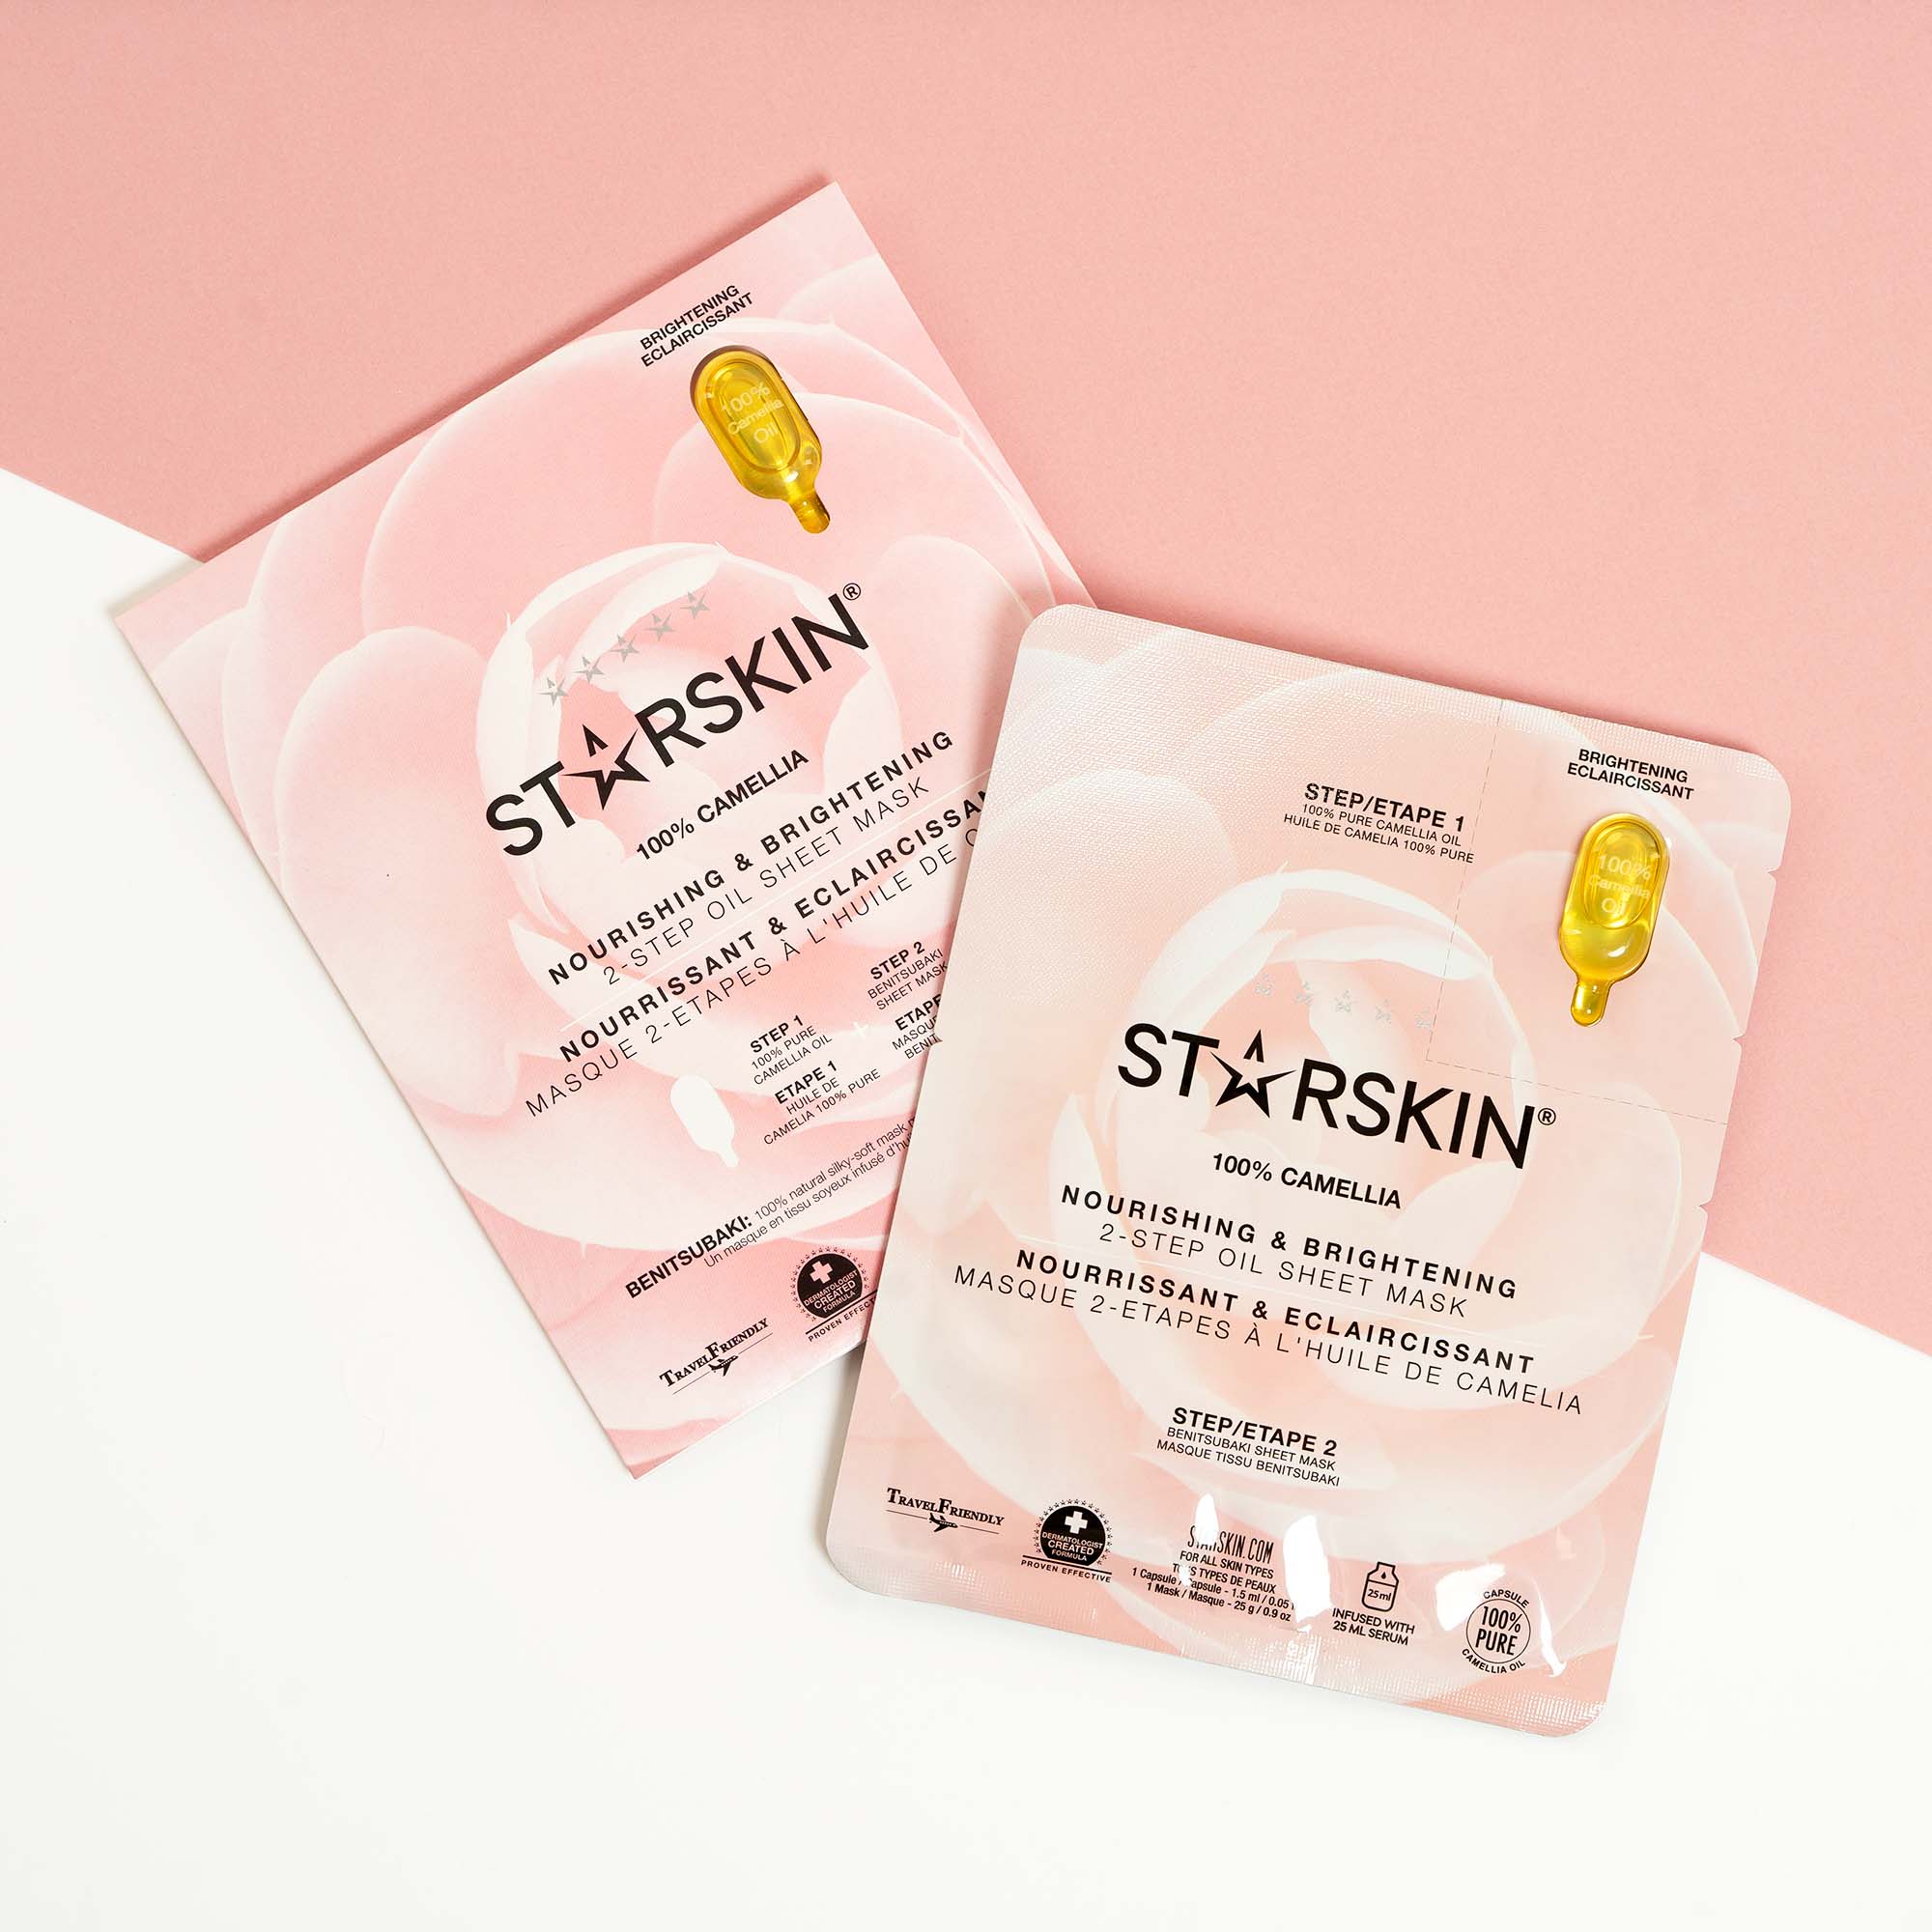 Starskin's Camellia® face sheet mask paper packaging and product packaging being shown on a pink and white background